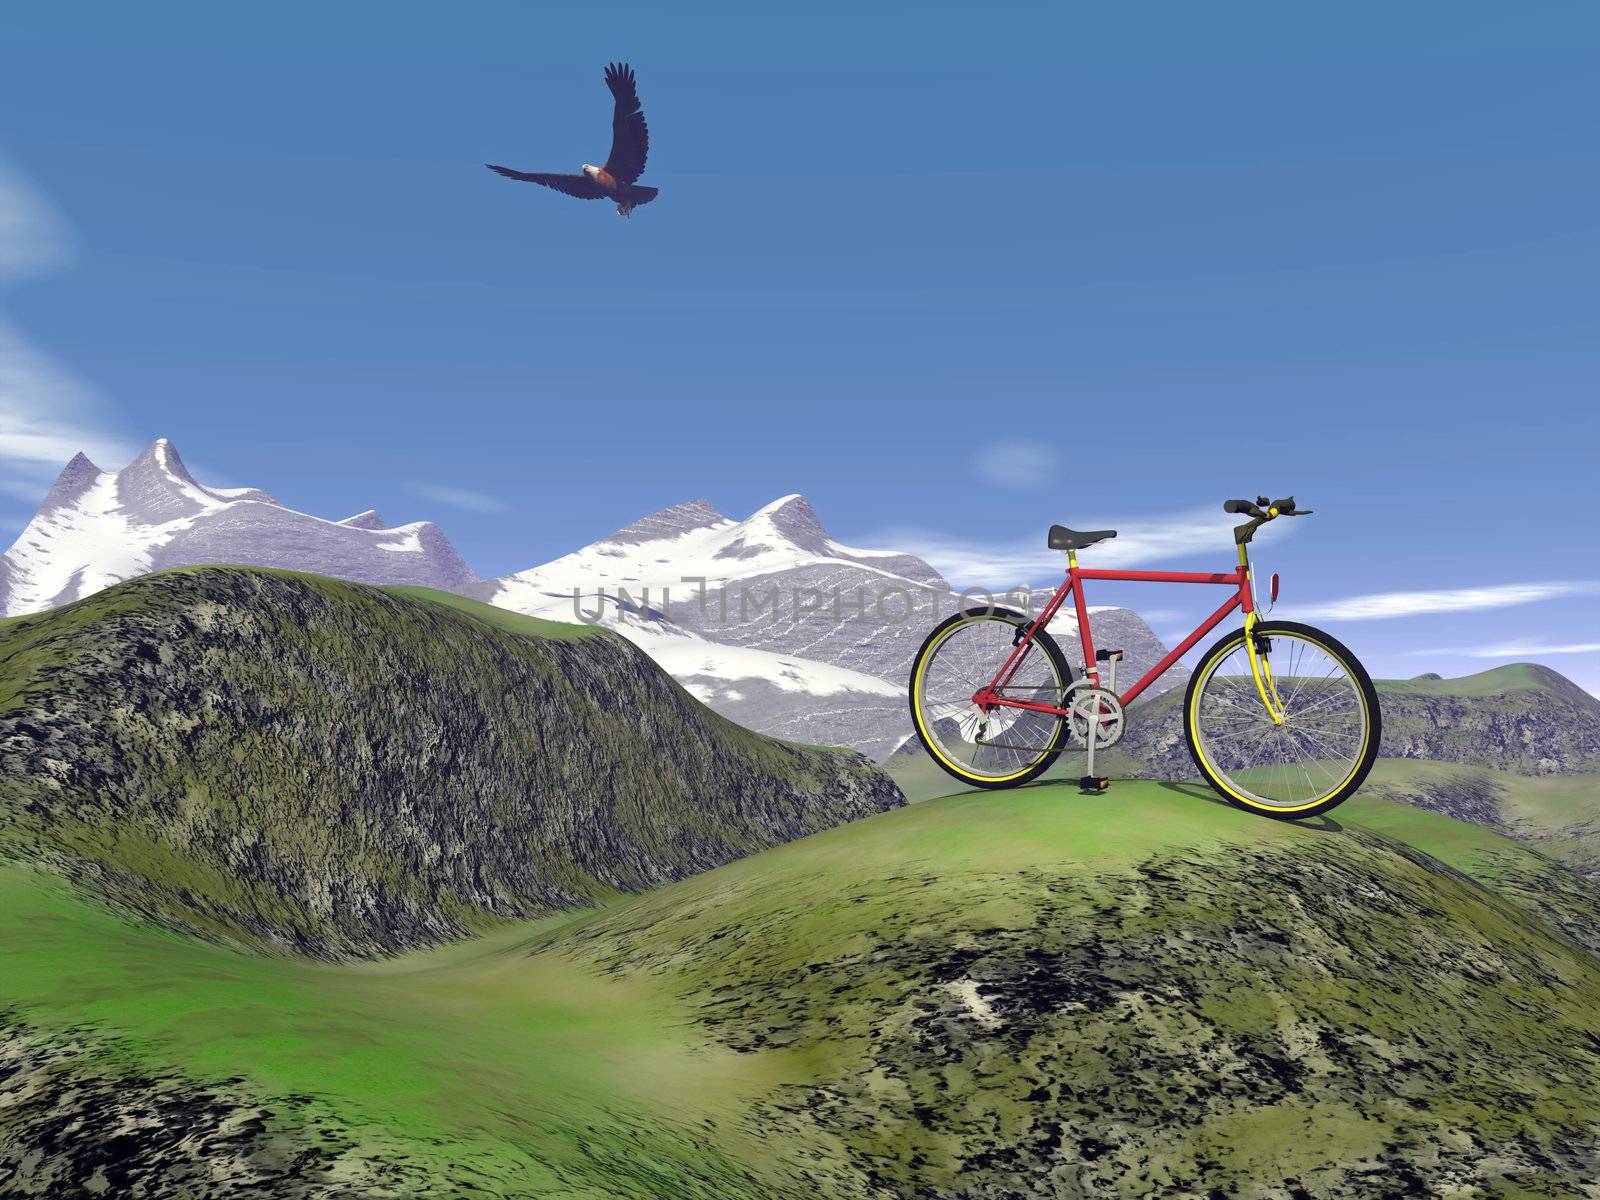 Red mountain bike at the mountain by summer day with eagle flying in the blue sky